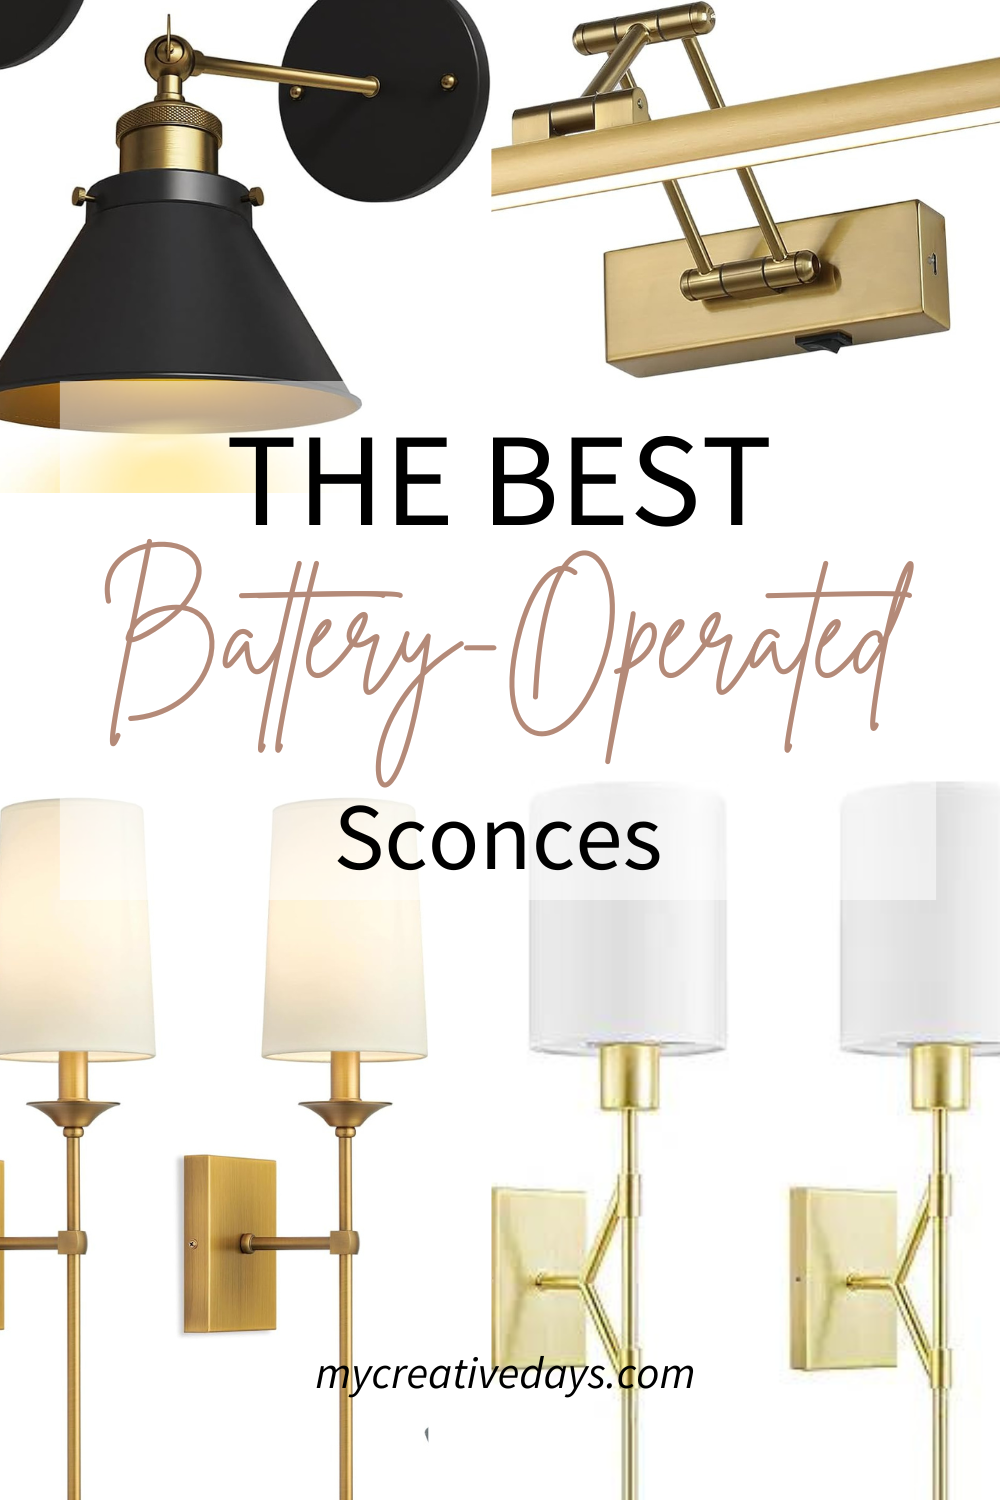 The Best Battery Operated Sconces